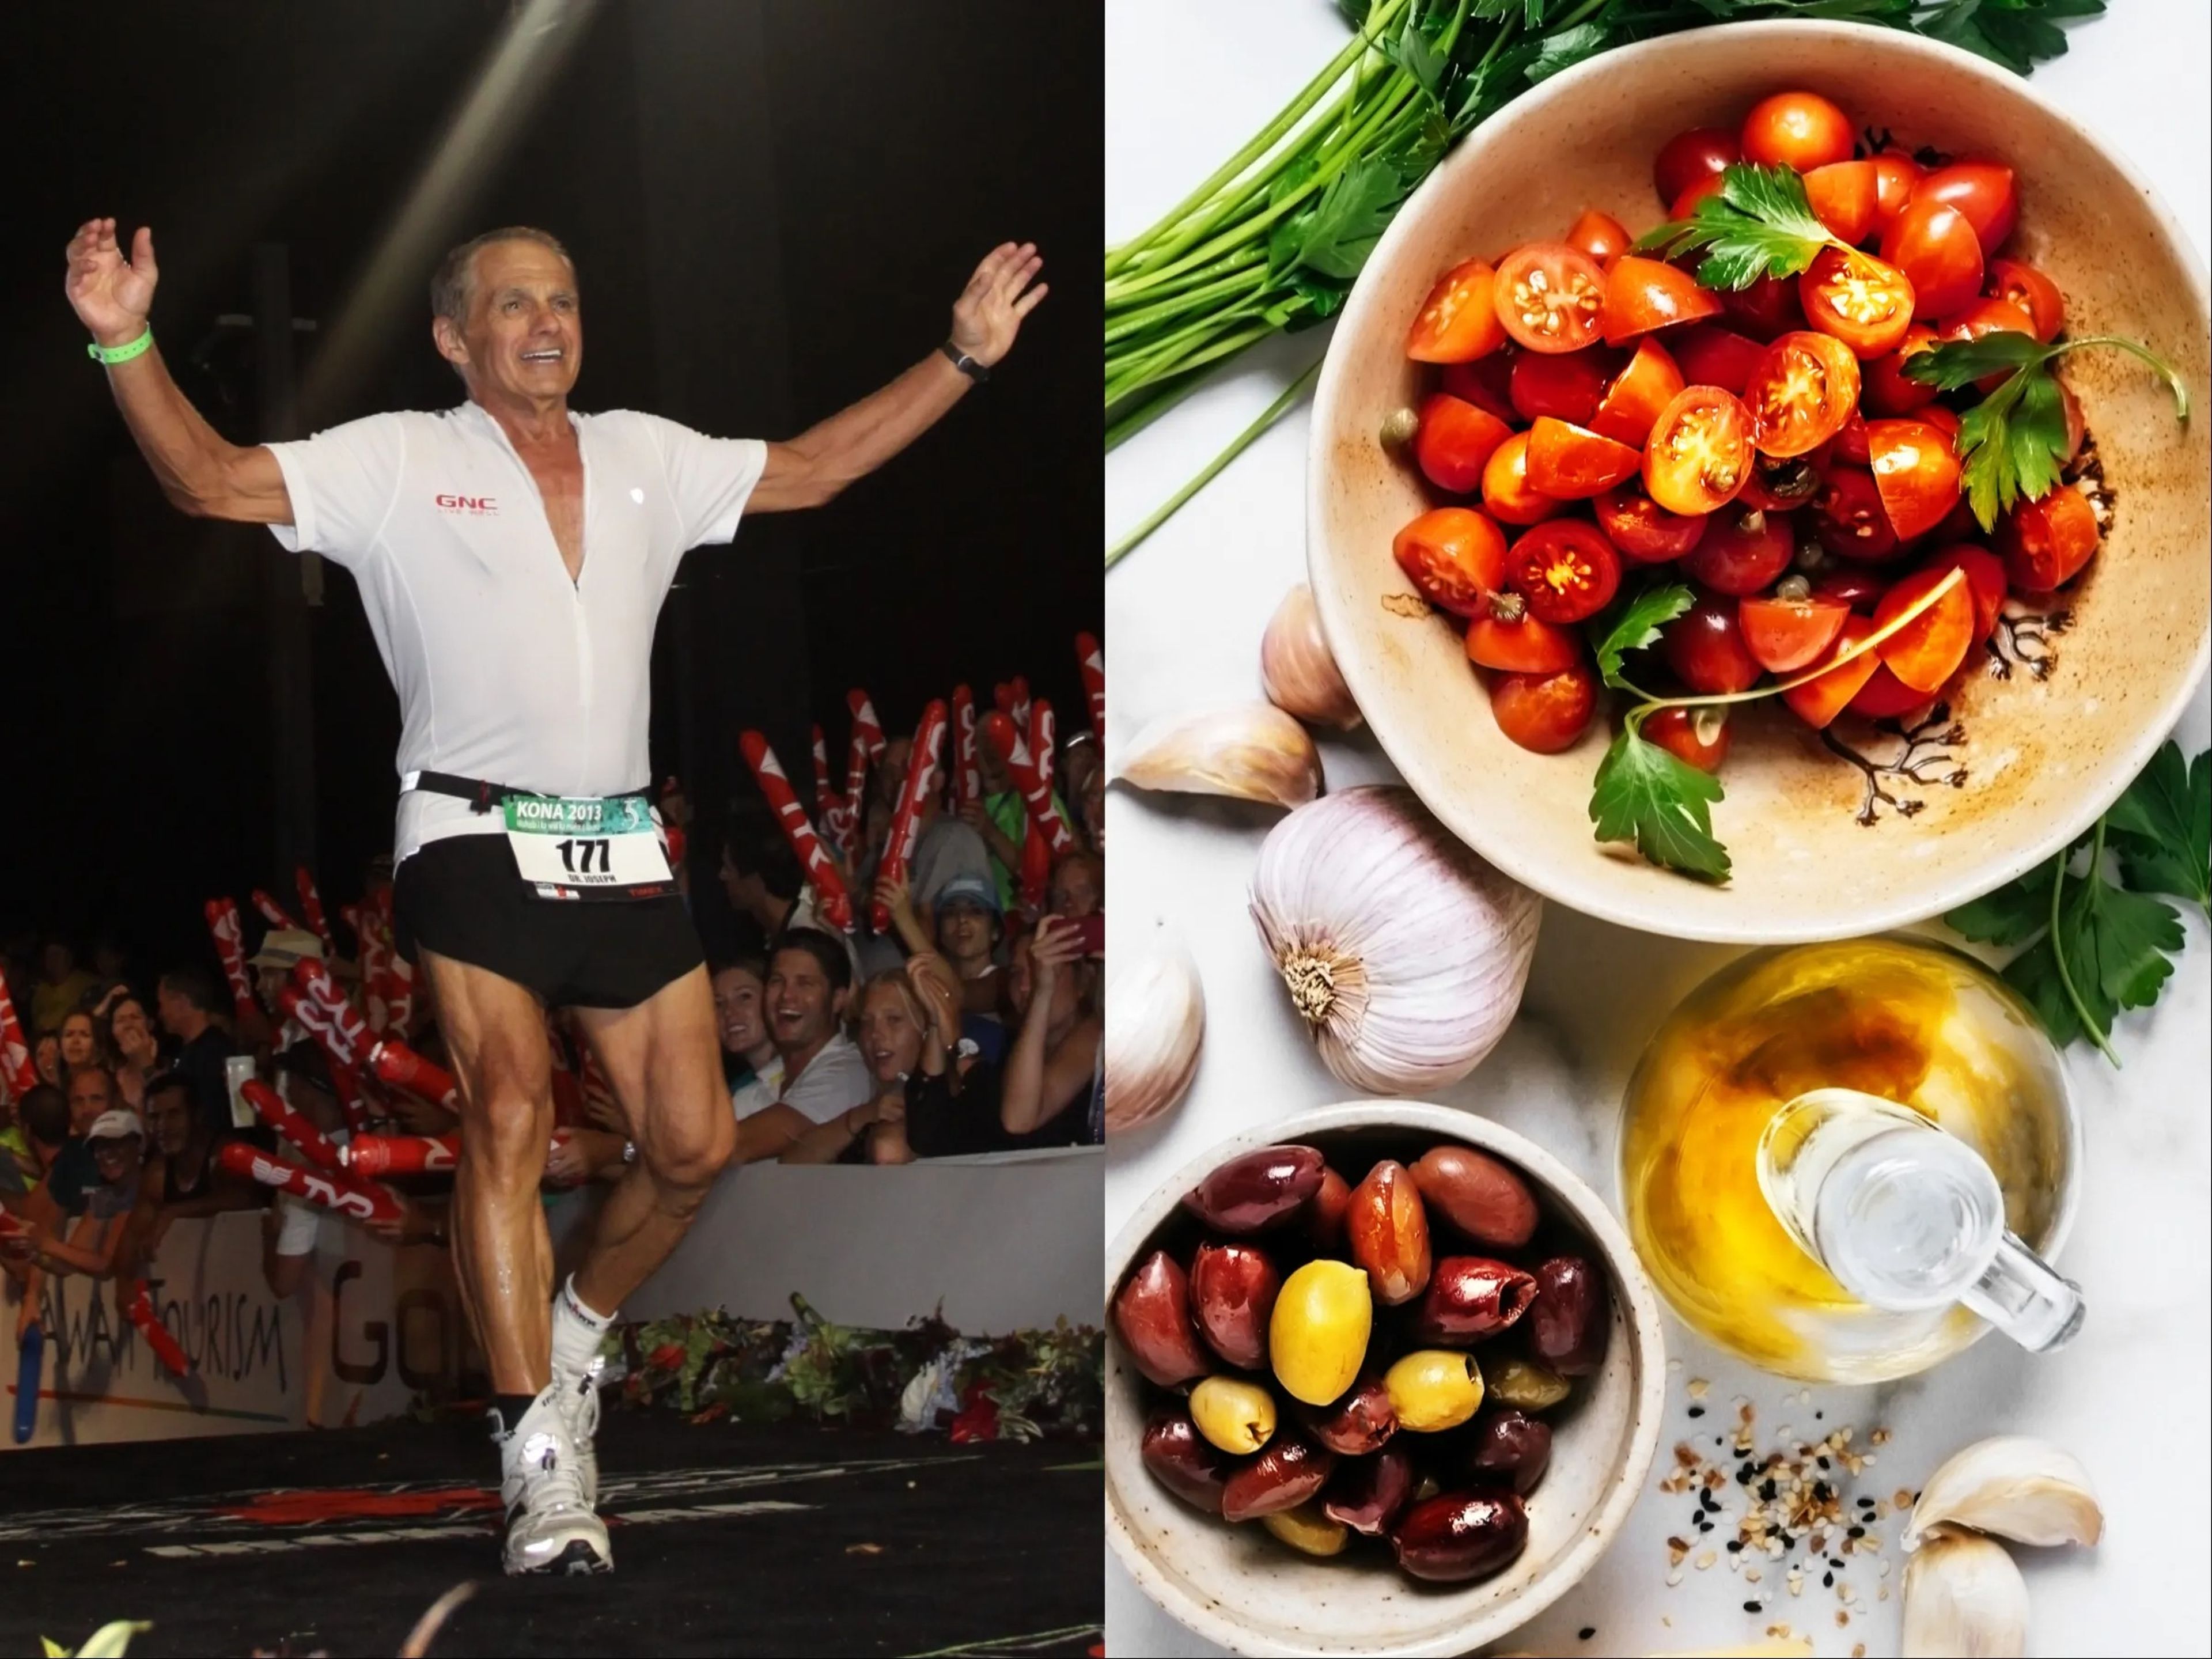 Dr. Joseph Maroon crosses the finish line at a triathlon next to a picture of healthy Mediterranean food.